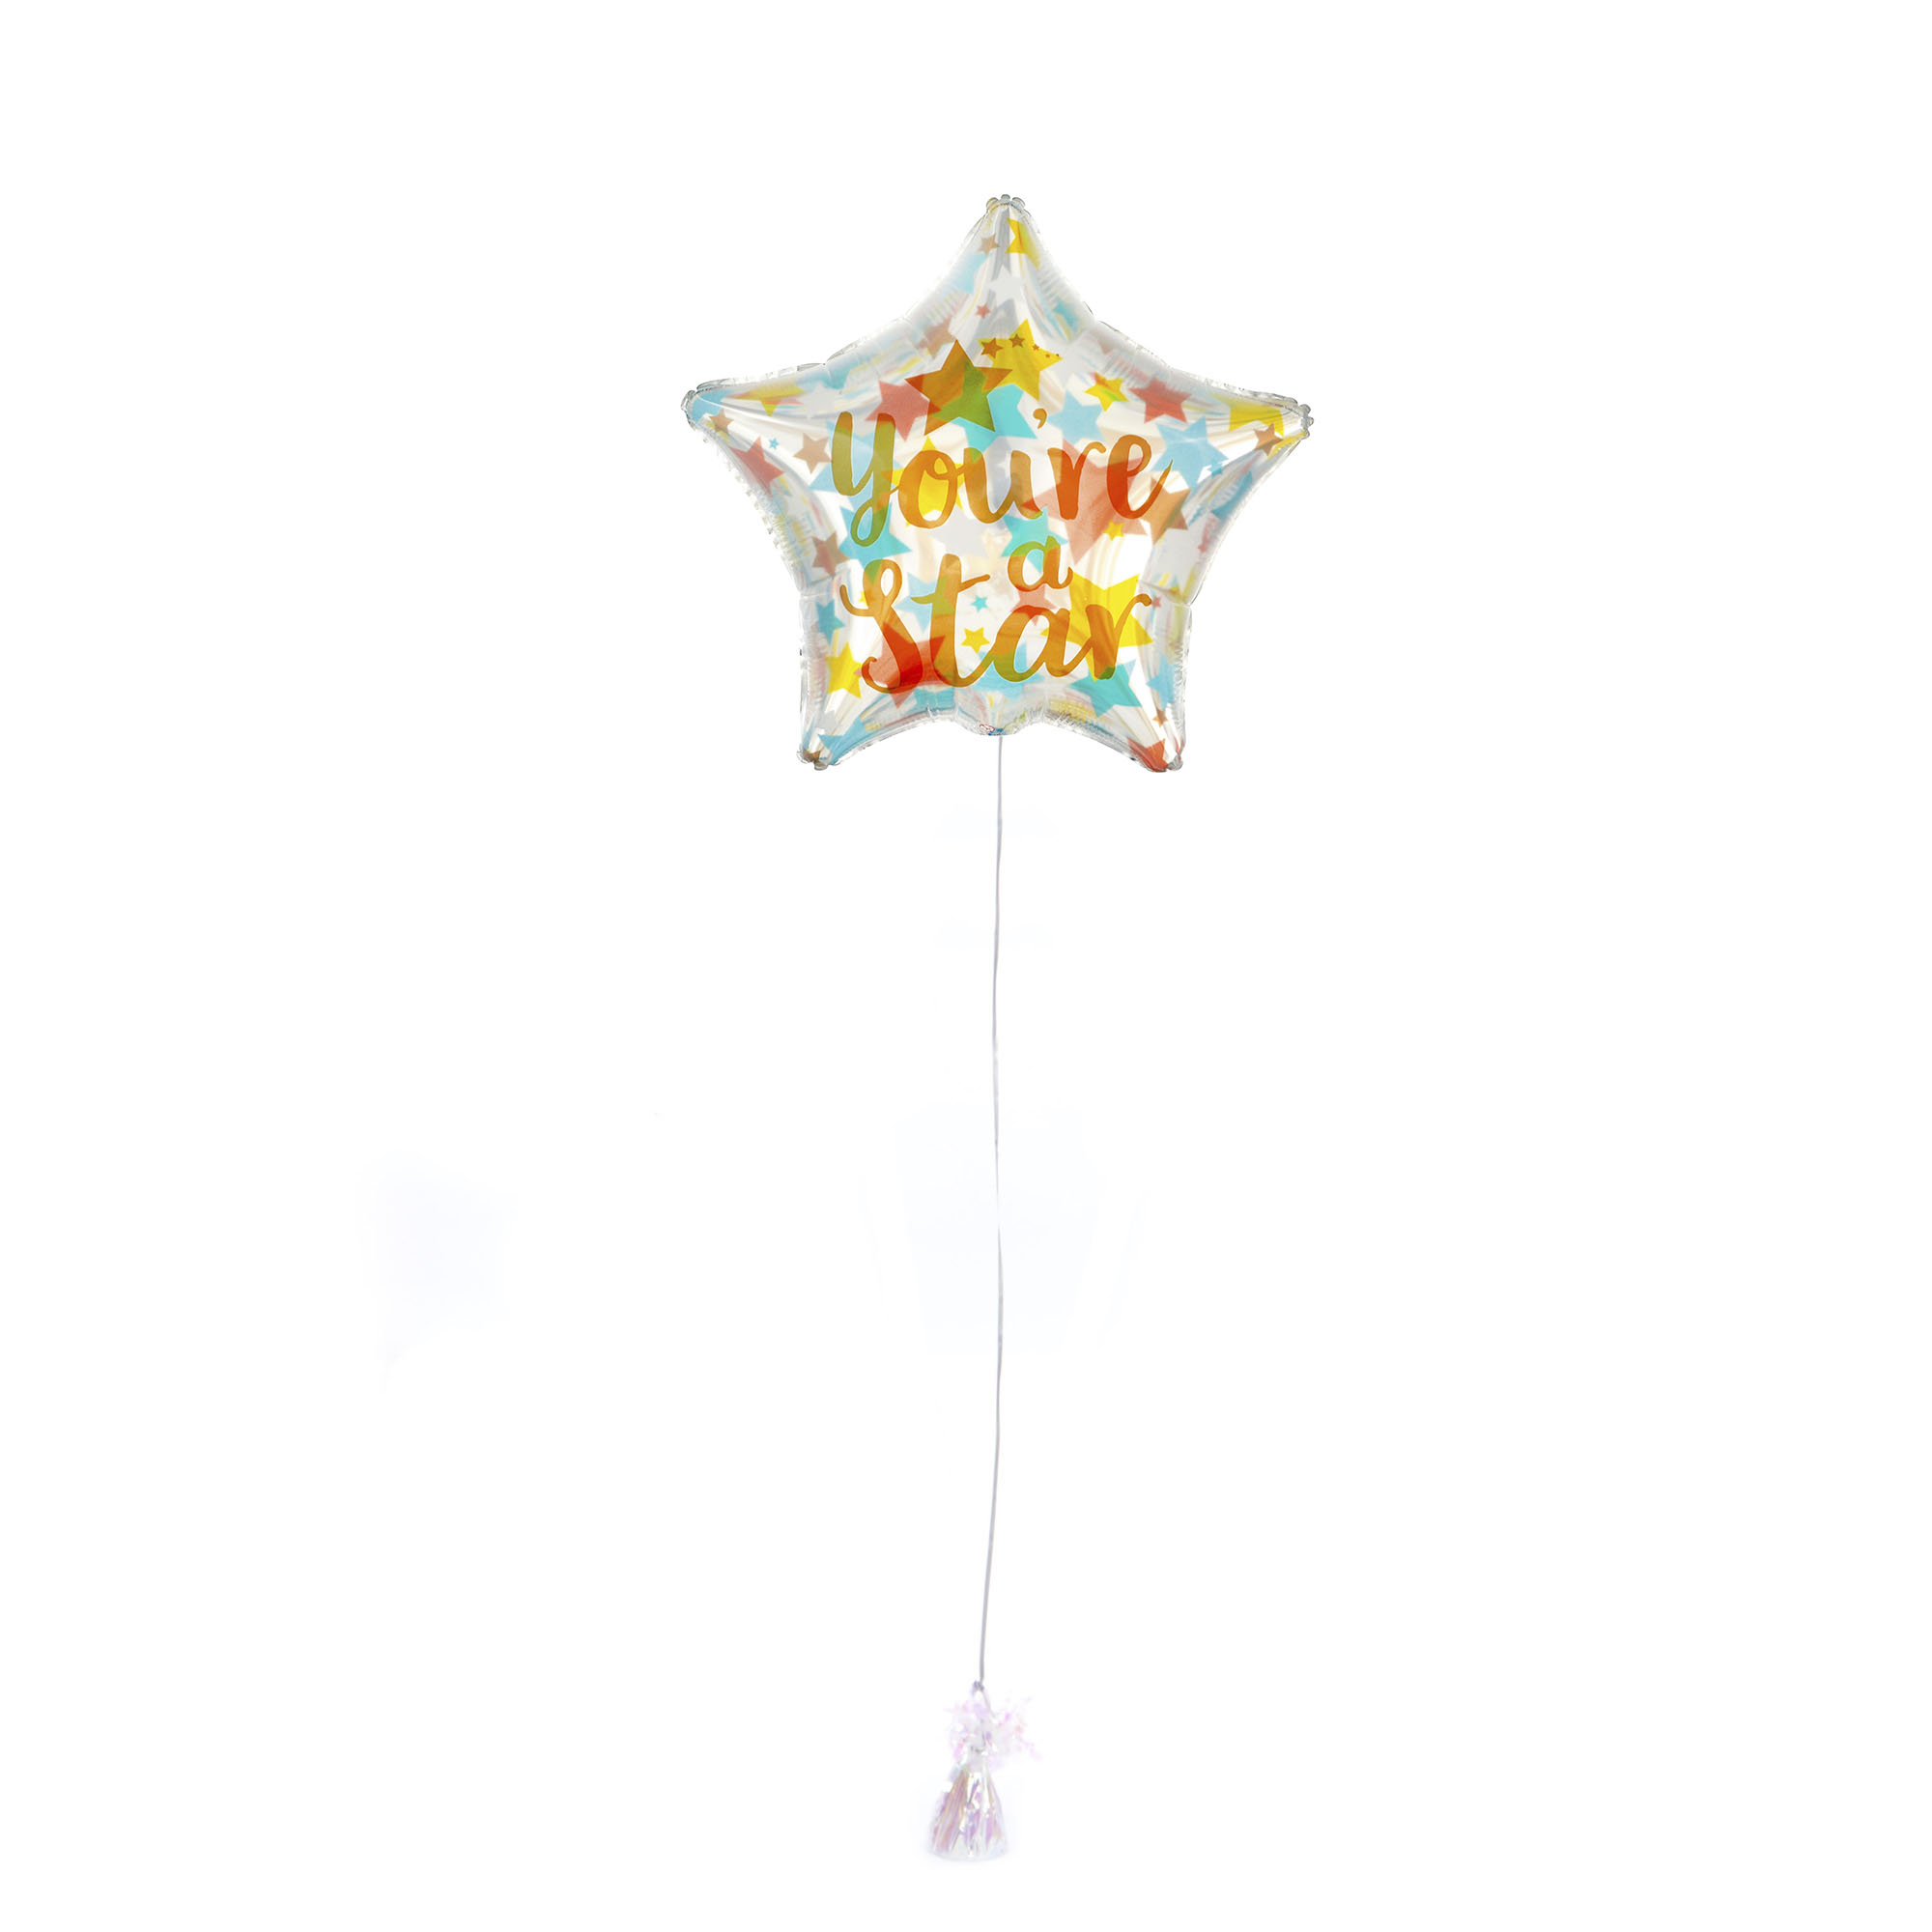 You're A Star Balloon & Lindt Chocolates - FREE GIFT CARD!